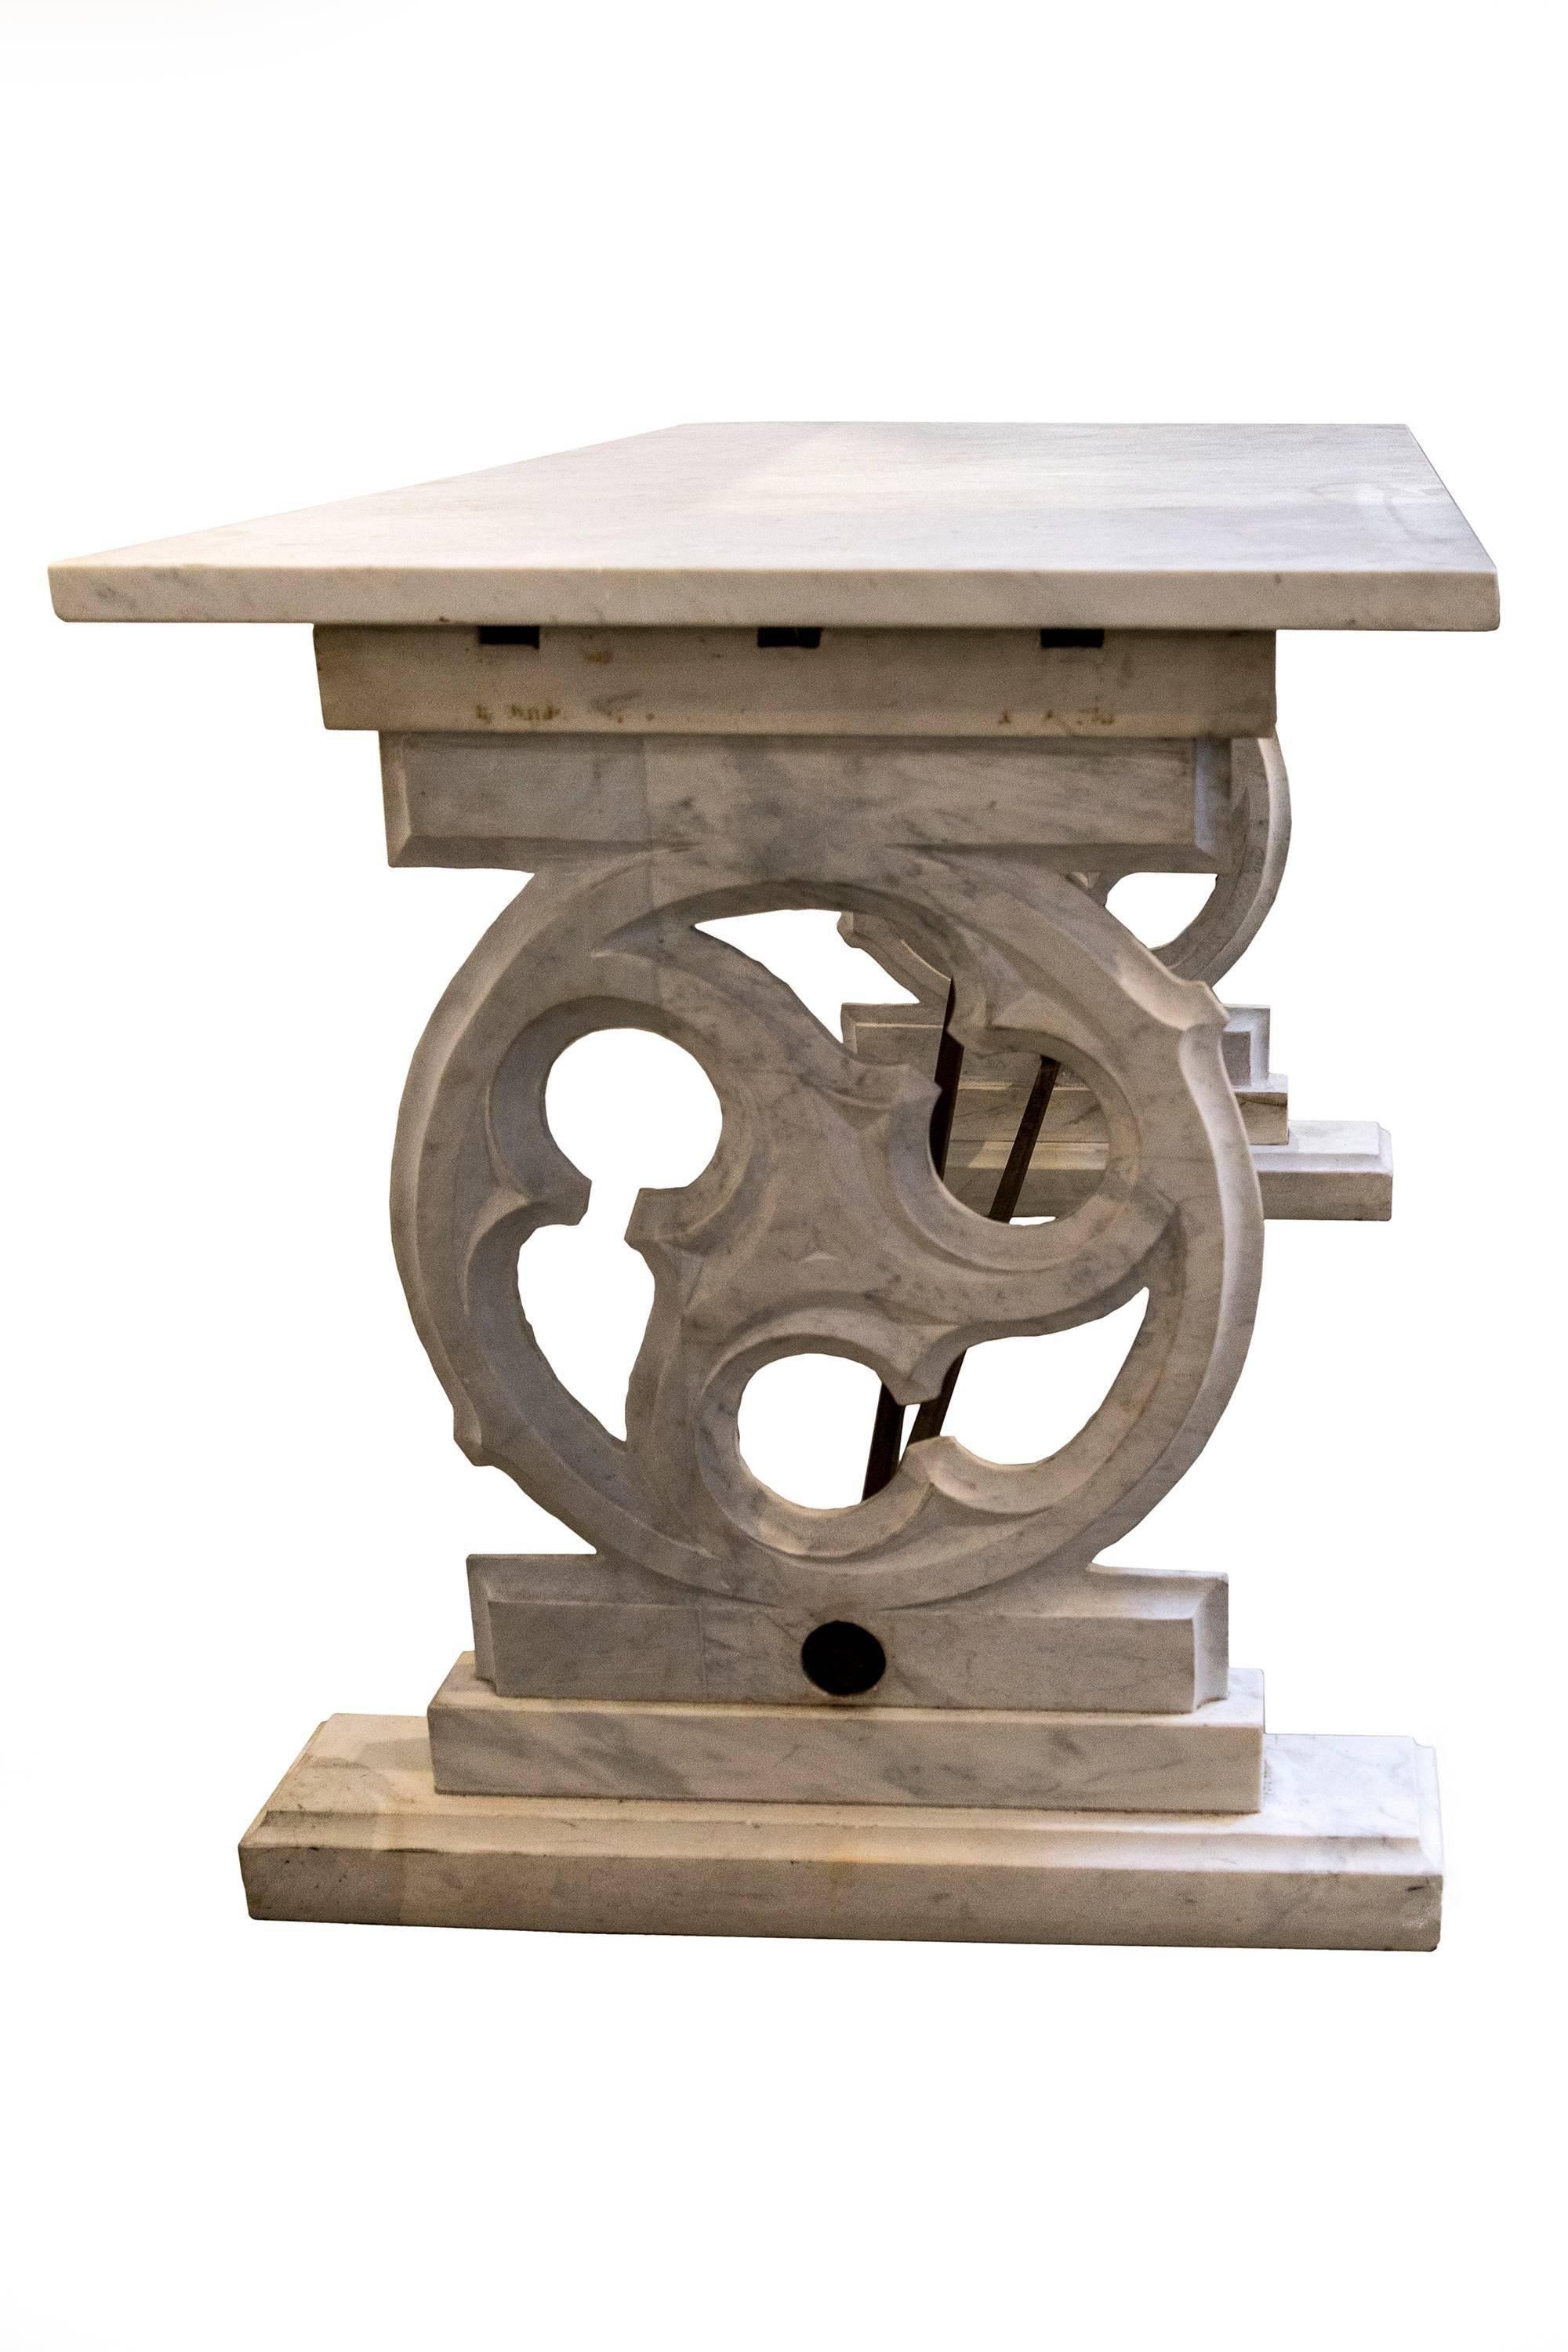 Gothic Revival White Carrara Marble Console Table or Work Table.